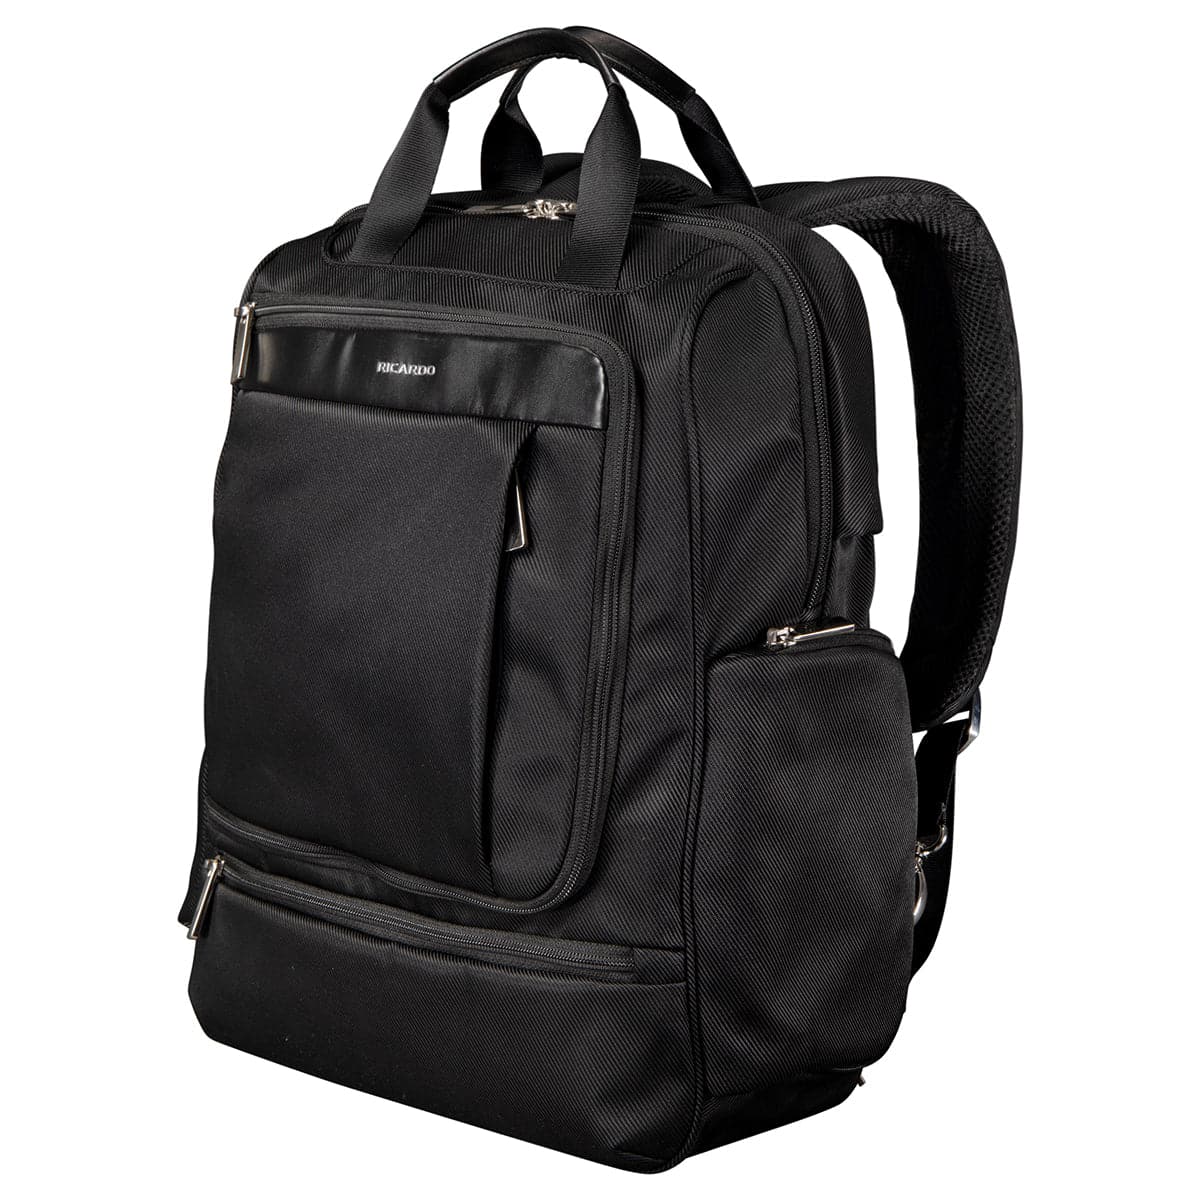 Ricardo Beverly Hills Rodeo Drive 2.0 Convertible Tech Laptop Backpack